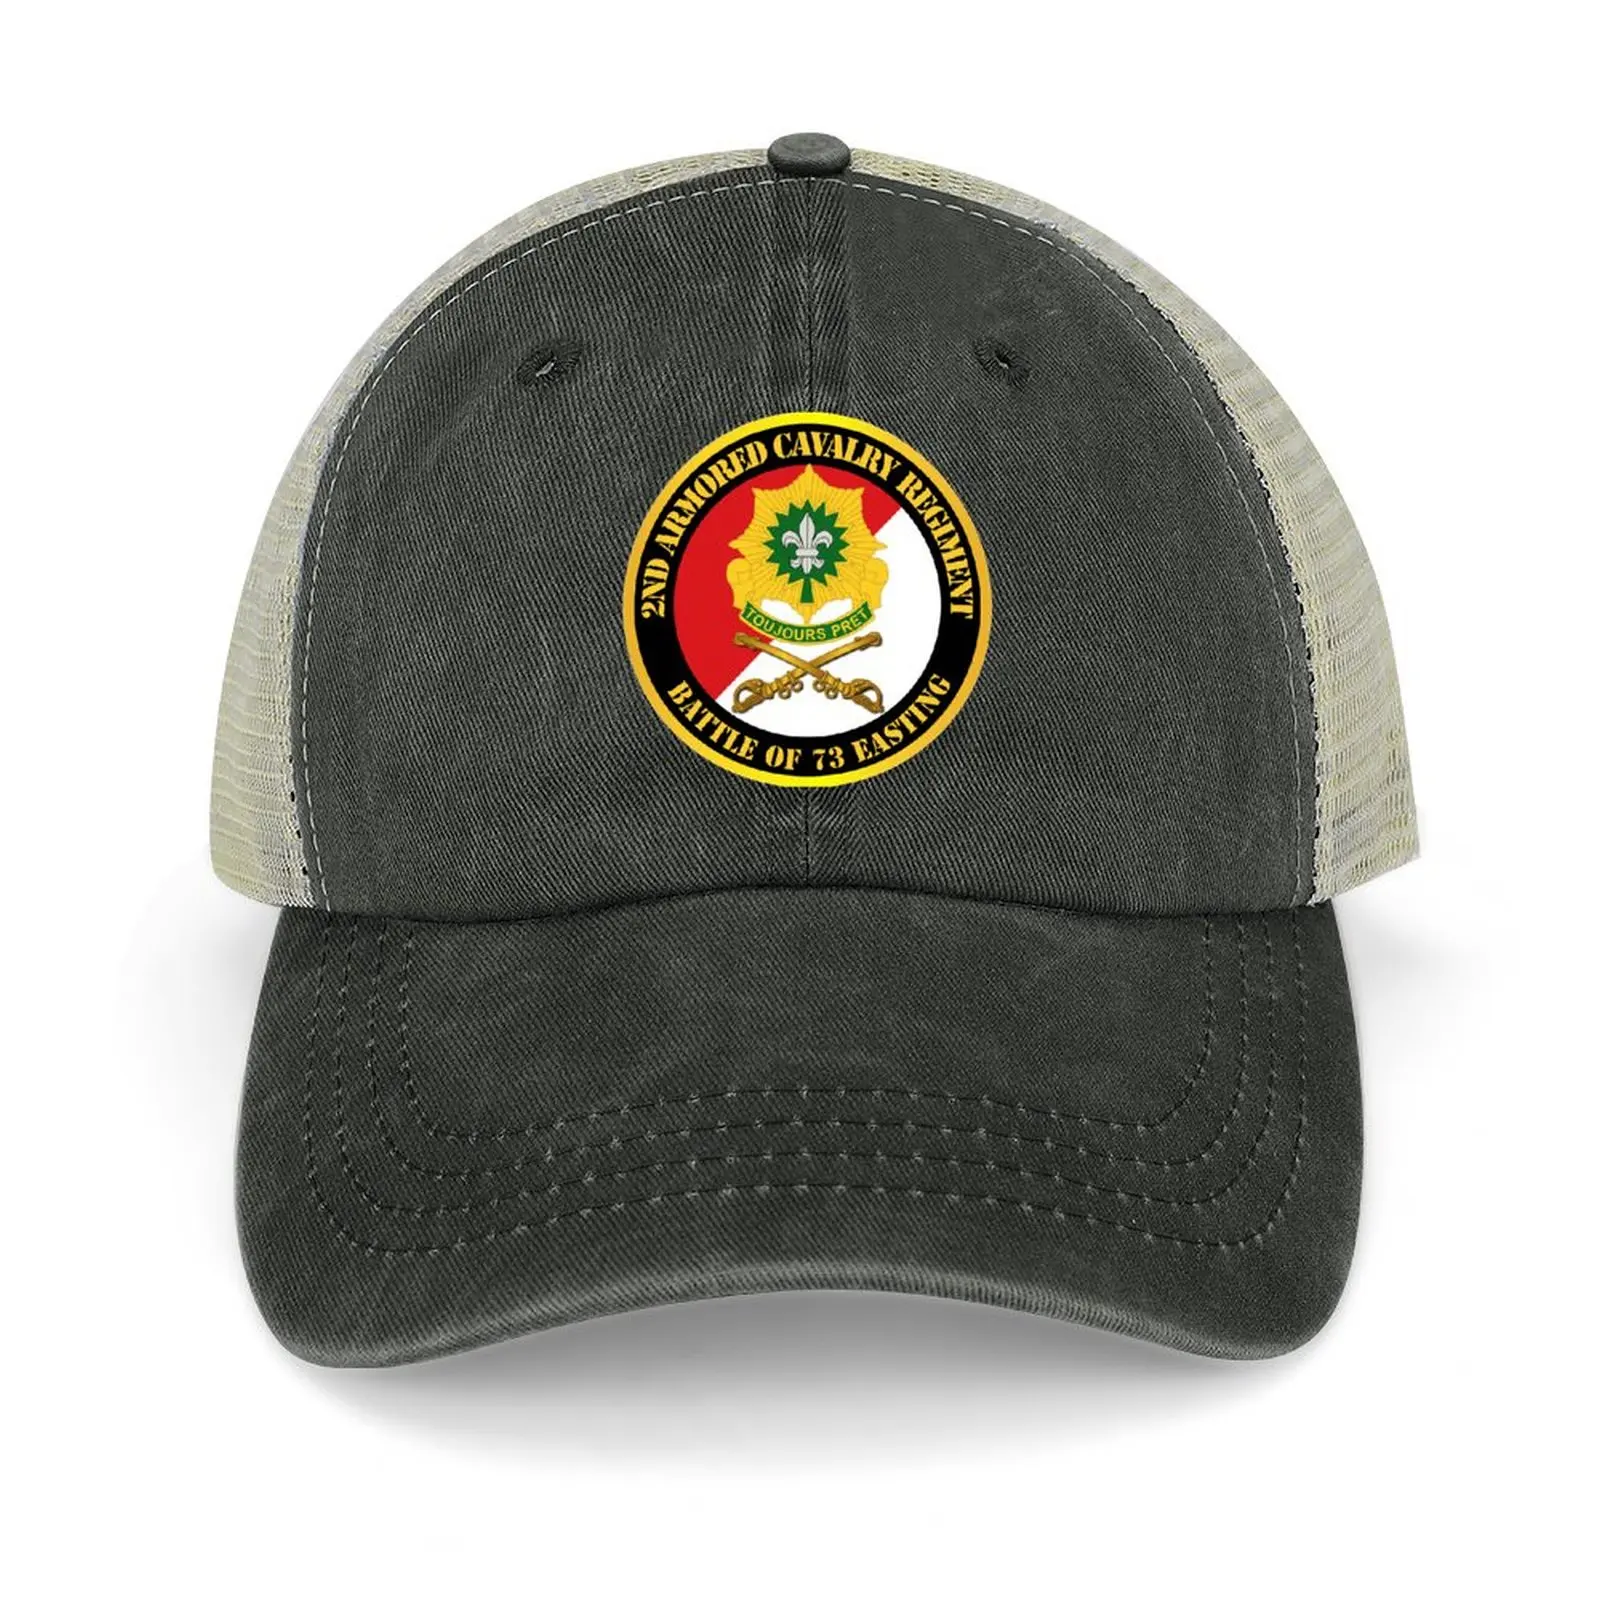 

Army - 2nd Armored Cavalry Regiment DUI - Red White - Battle of 73 Easting Cowboy Hat dad hat For Women Men's